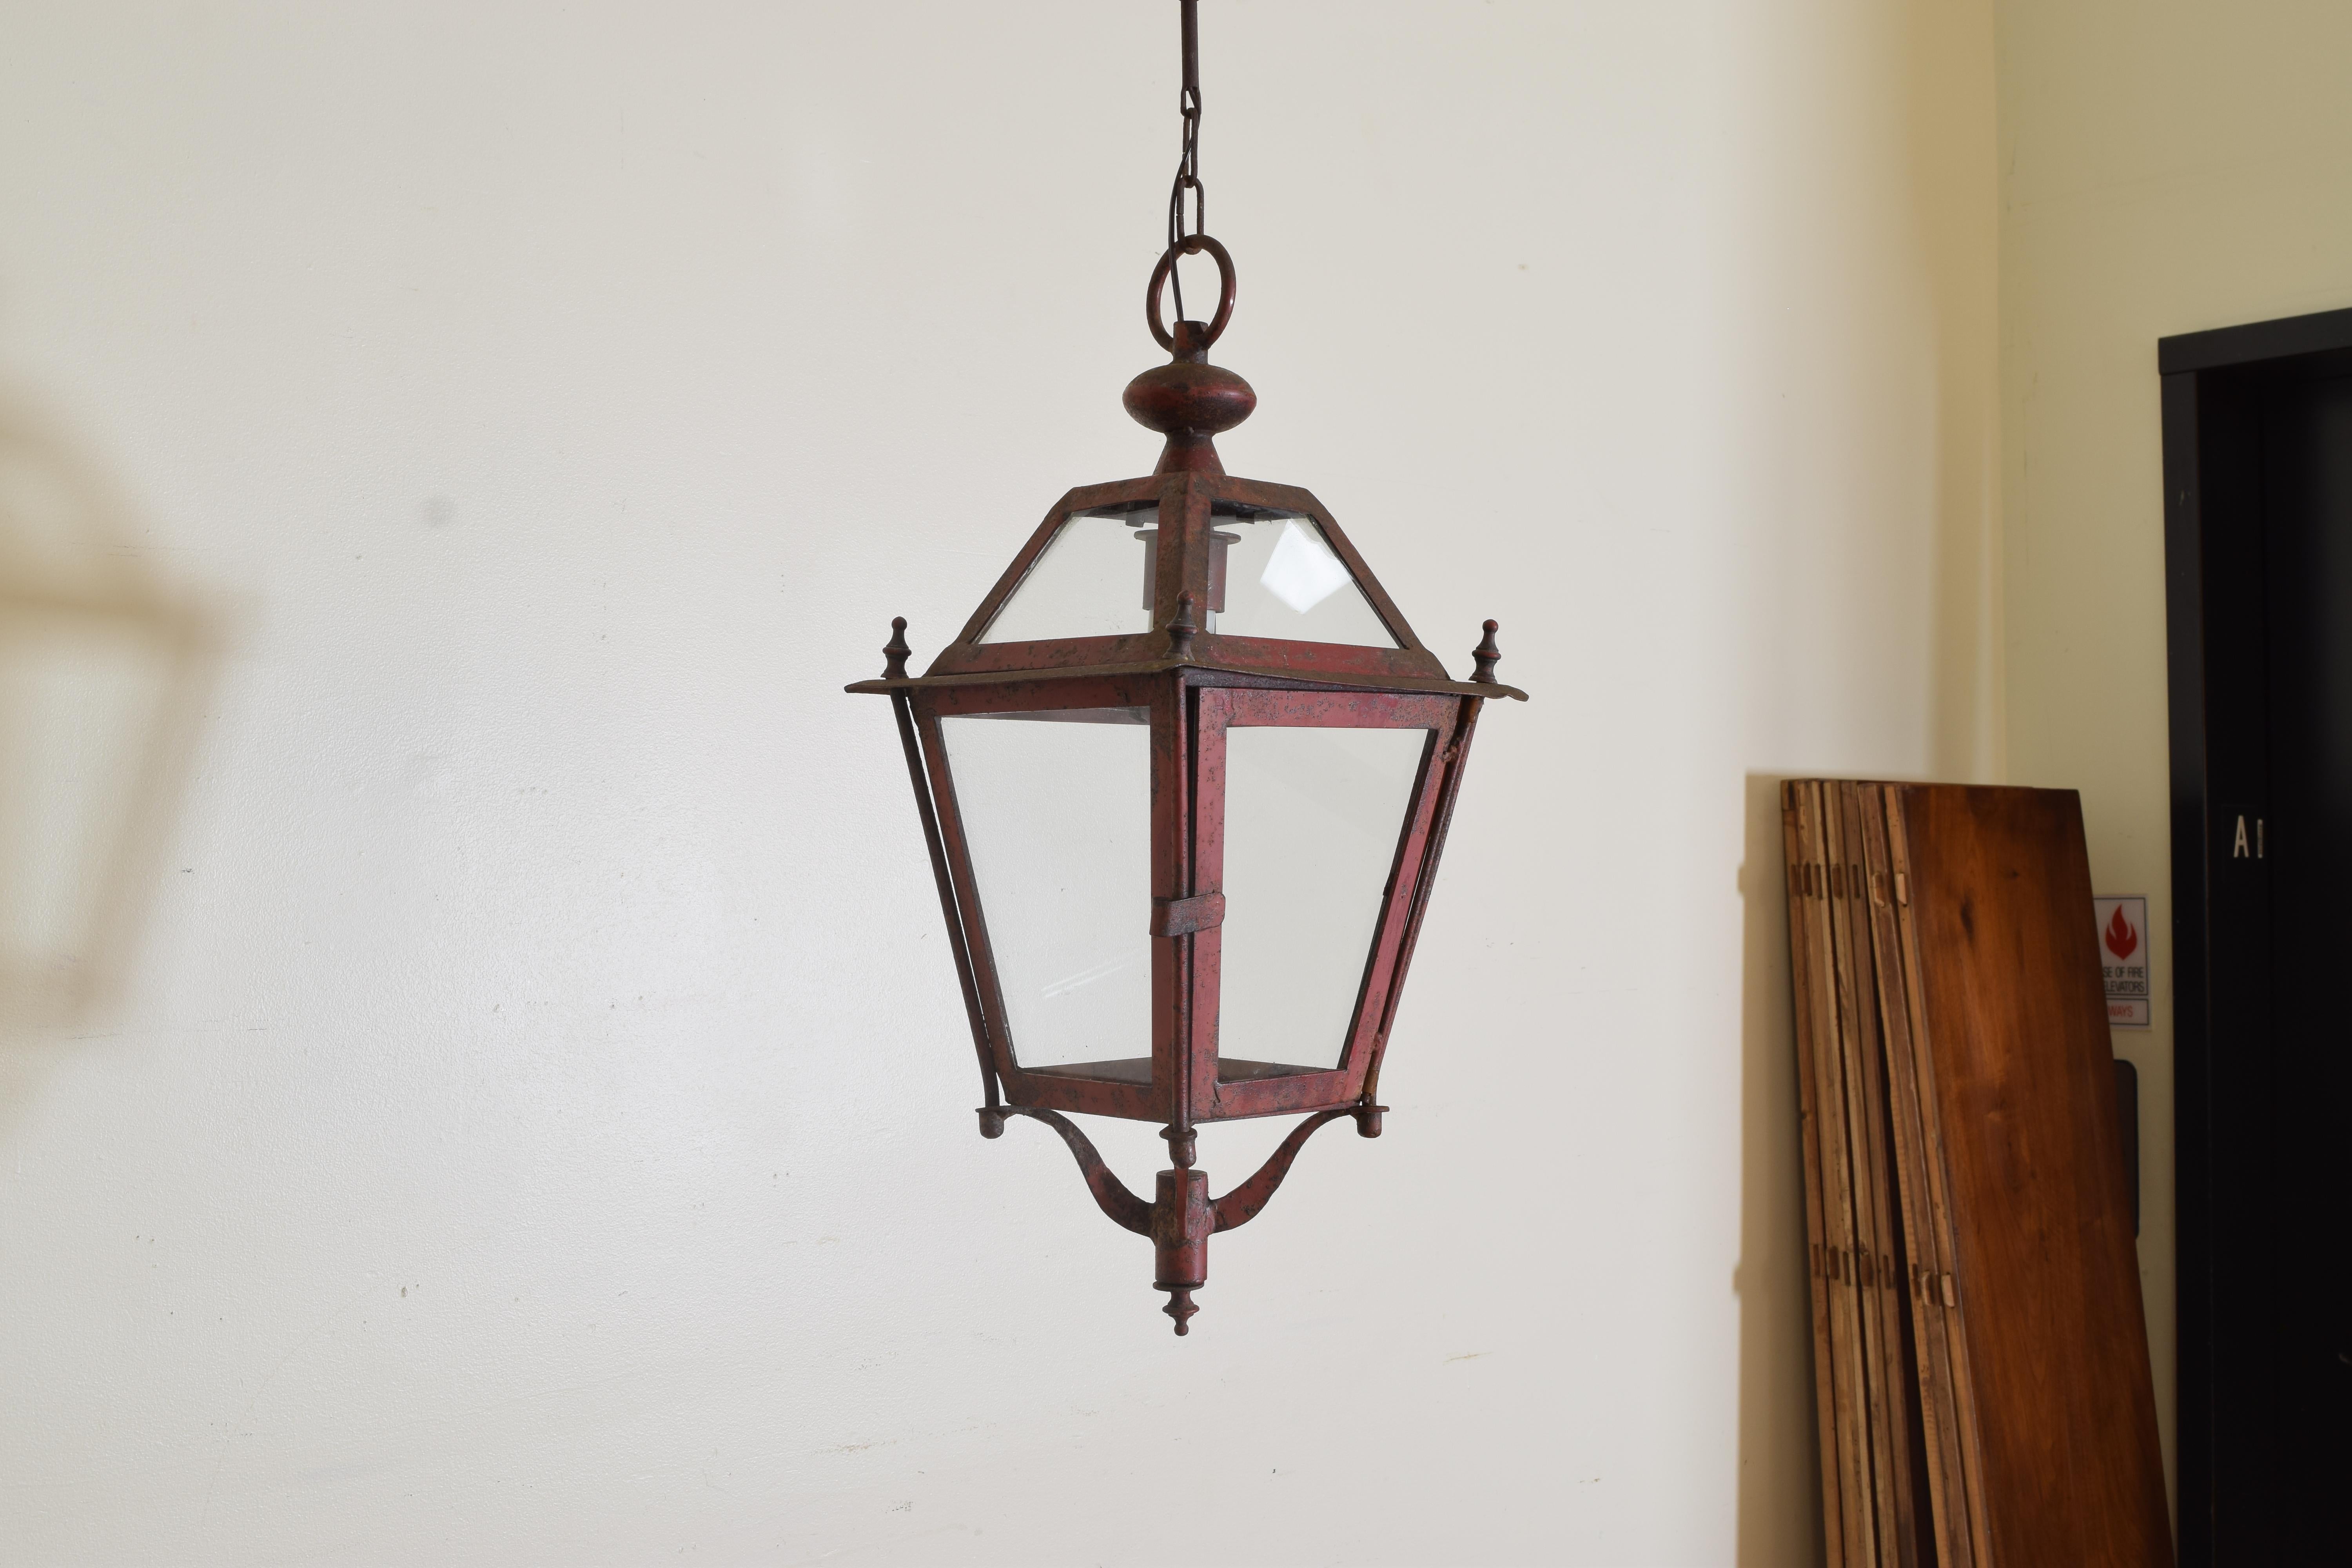 Hand-Painted Early 20th Century Italian Red Painted Iron Lanterns (5 available)